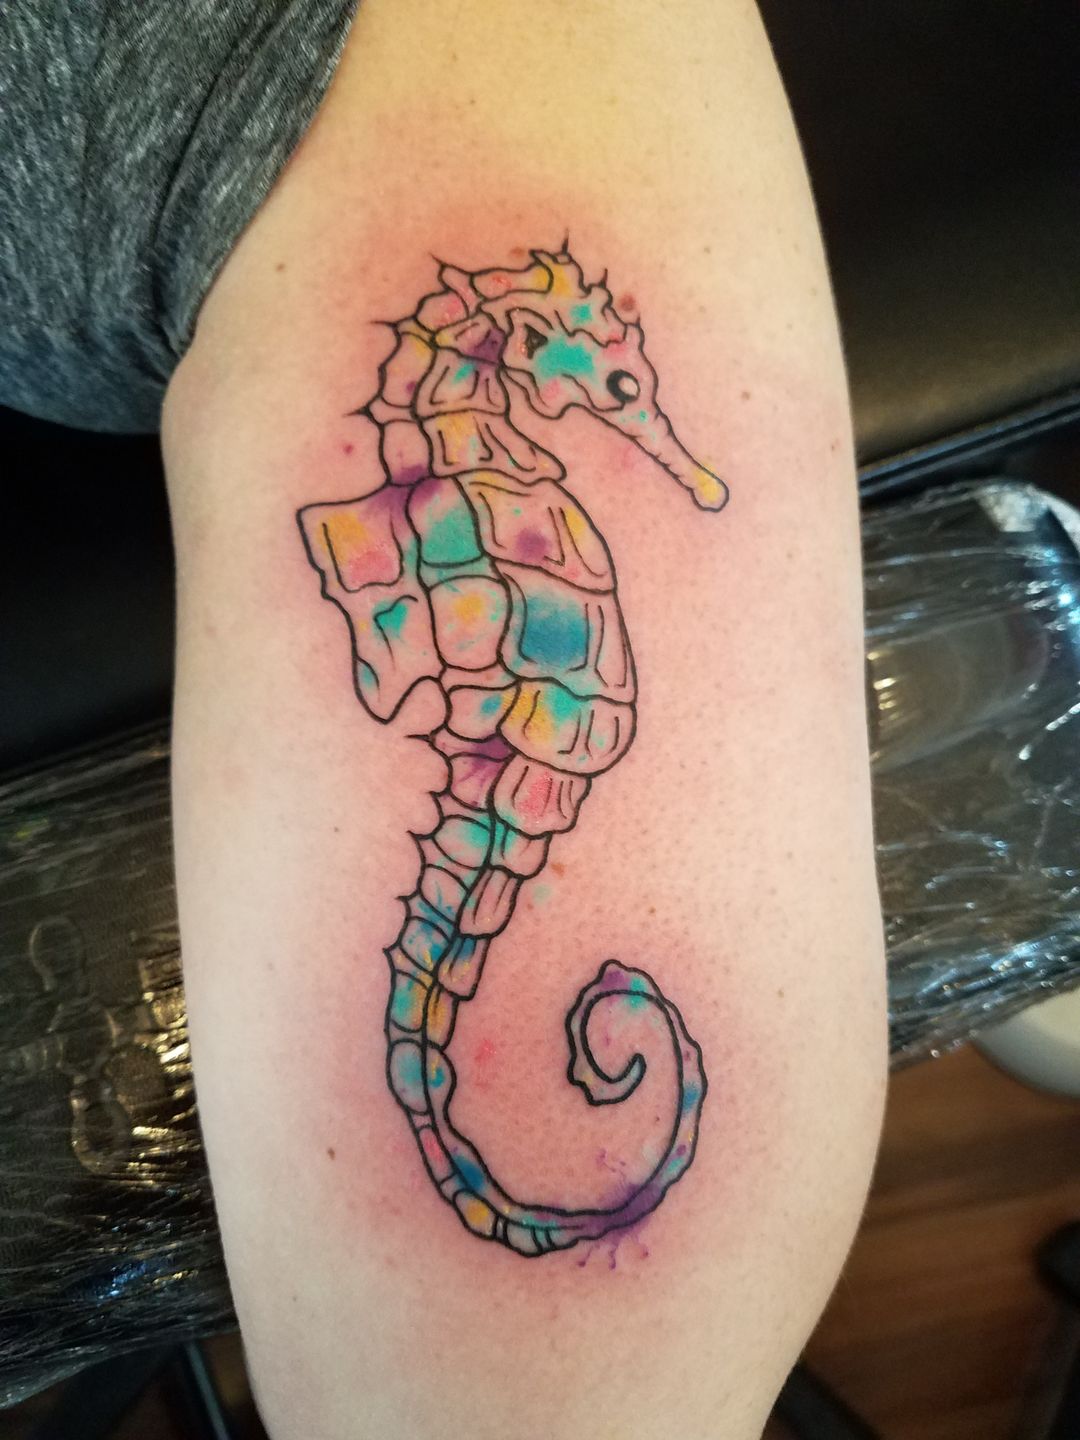 Tattoo uploaded by Ashlee Wilson  Abstract watercolor seahorse and  jellyfish watercolortattoo abstracttattoo seahorsetattoo  jellyfishtattoo staugustinetattooartist  Tattoodo